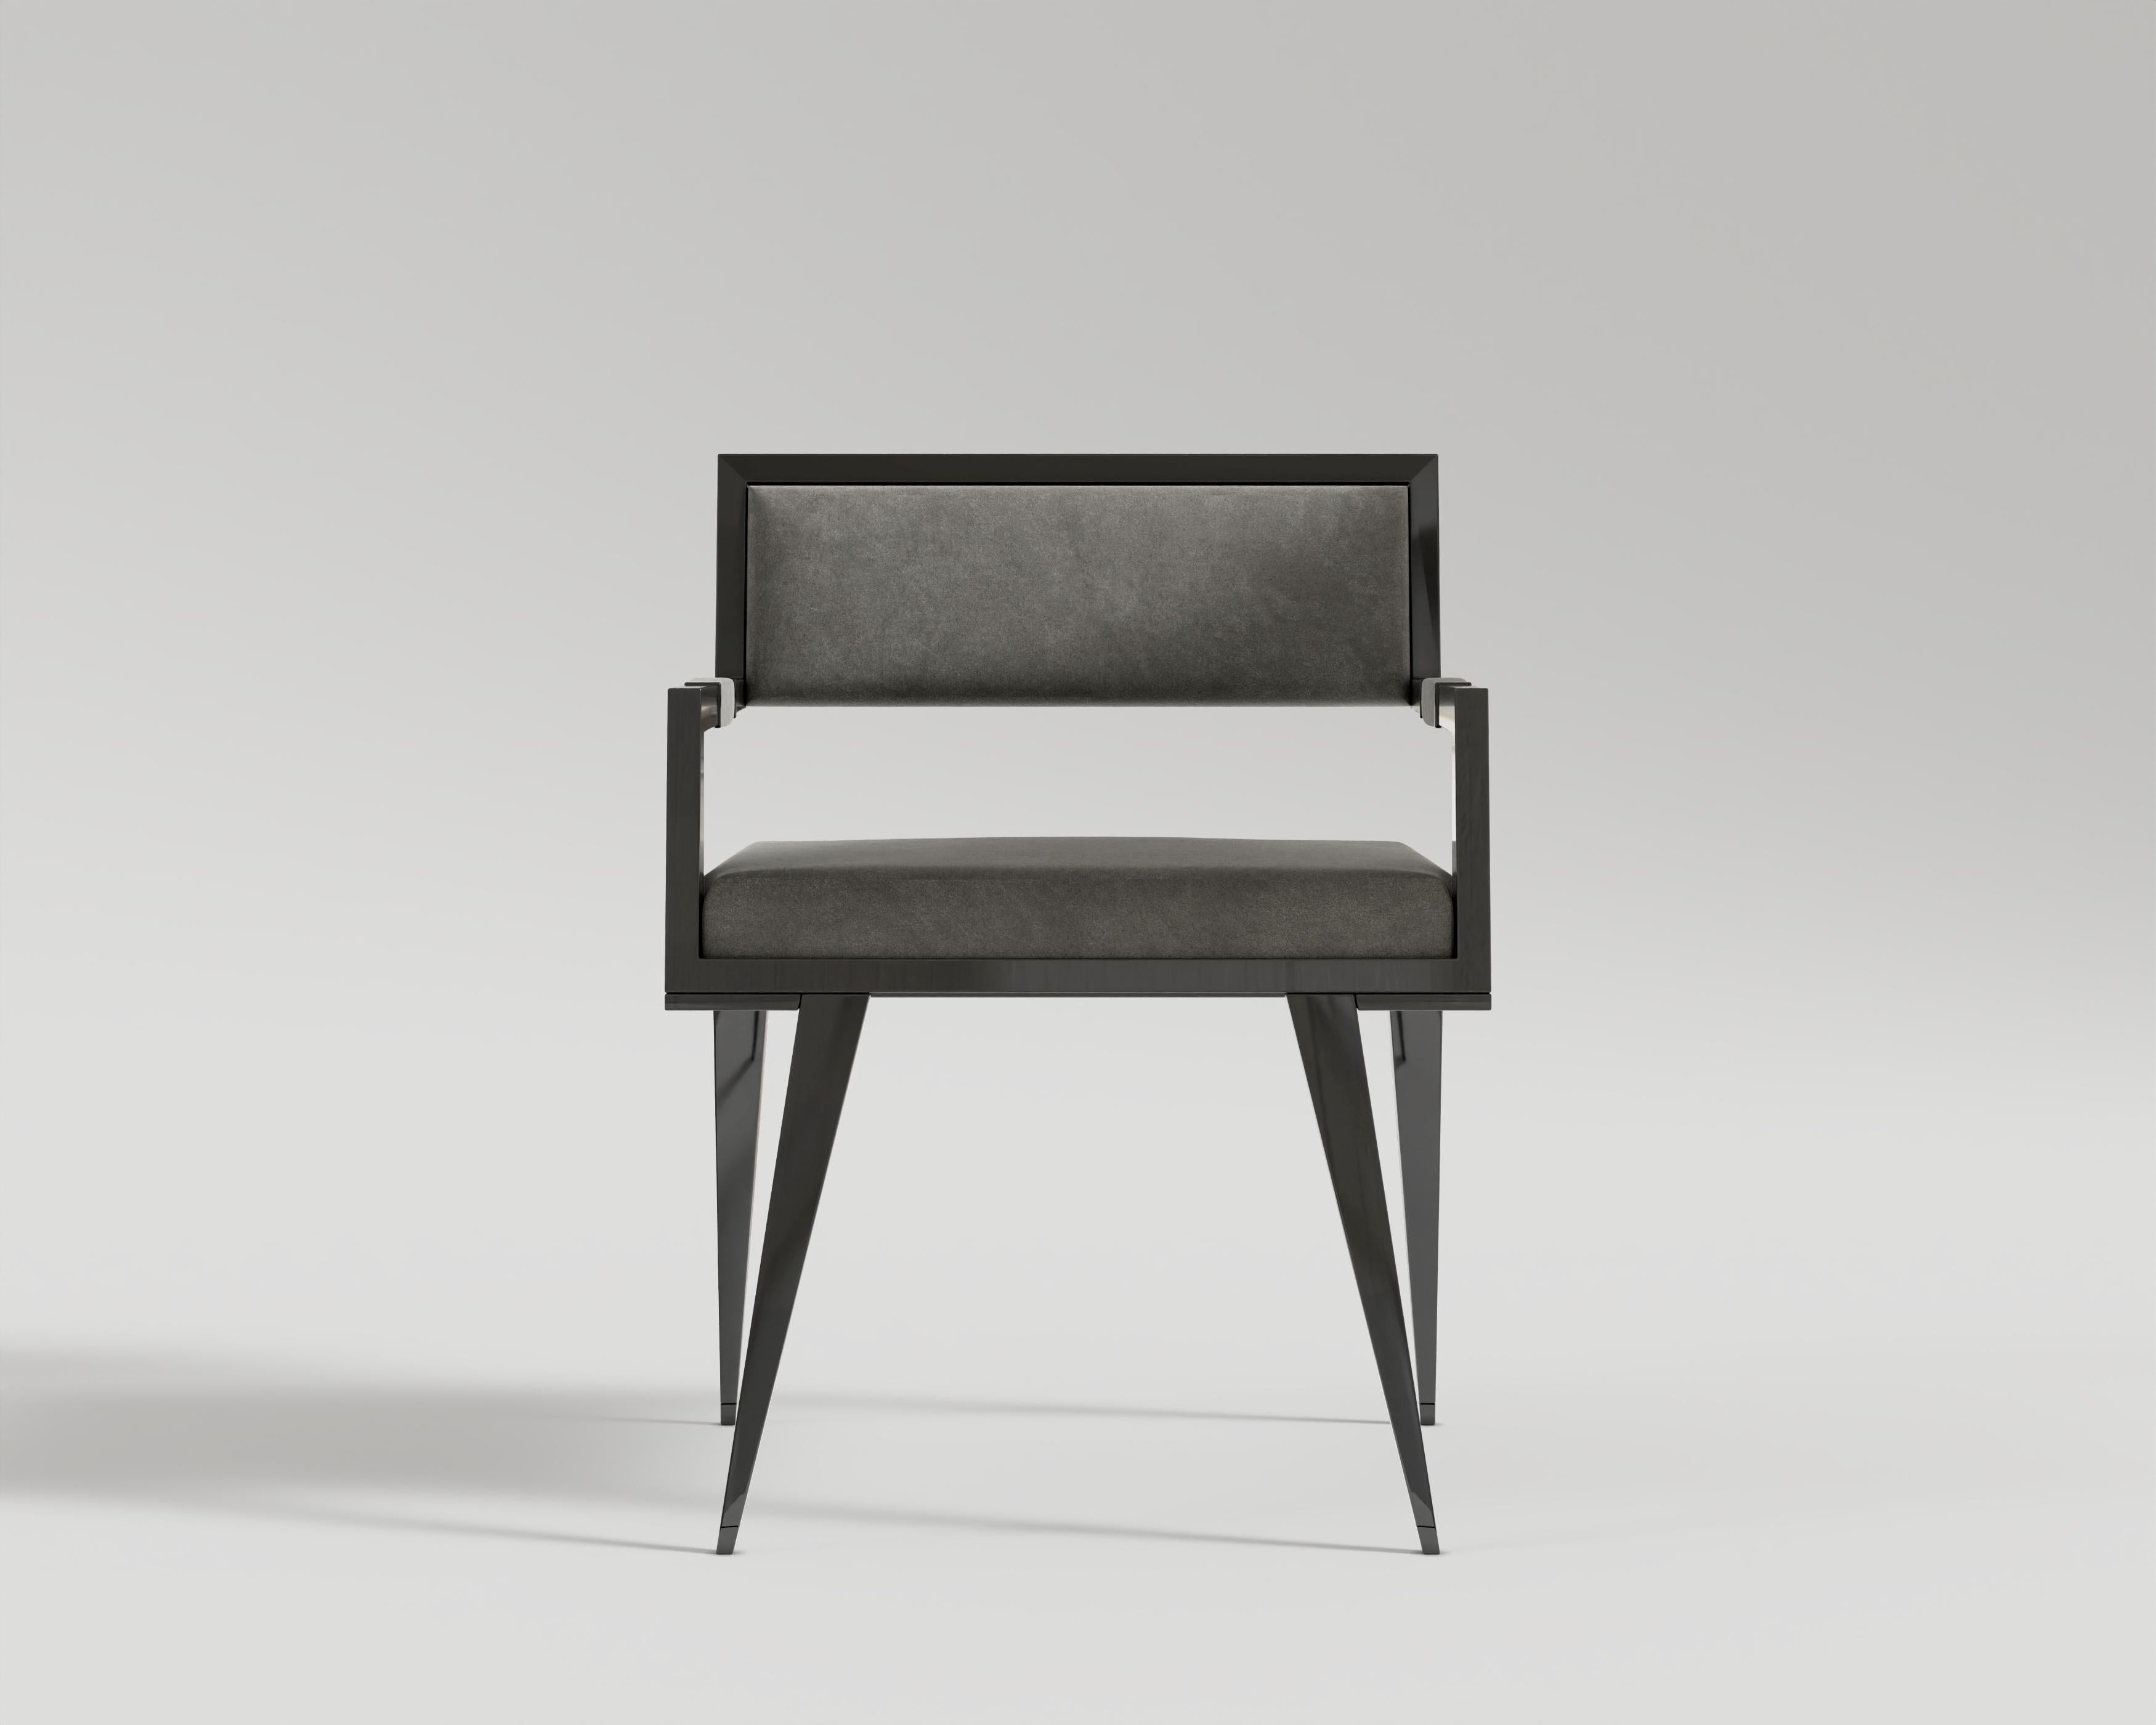 Le Loup Chair
A sense of renewal comes forth in the Le Loup Dining Chair. Captivating, the mix of black lacquer and polished bronze legs and plush cushioning of the Le Loup create an overwhelming sense of sophisticated elegance in any dining